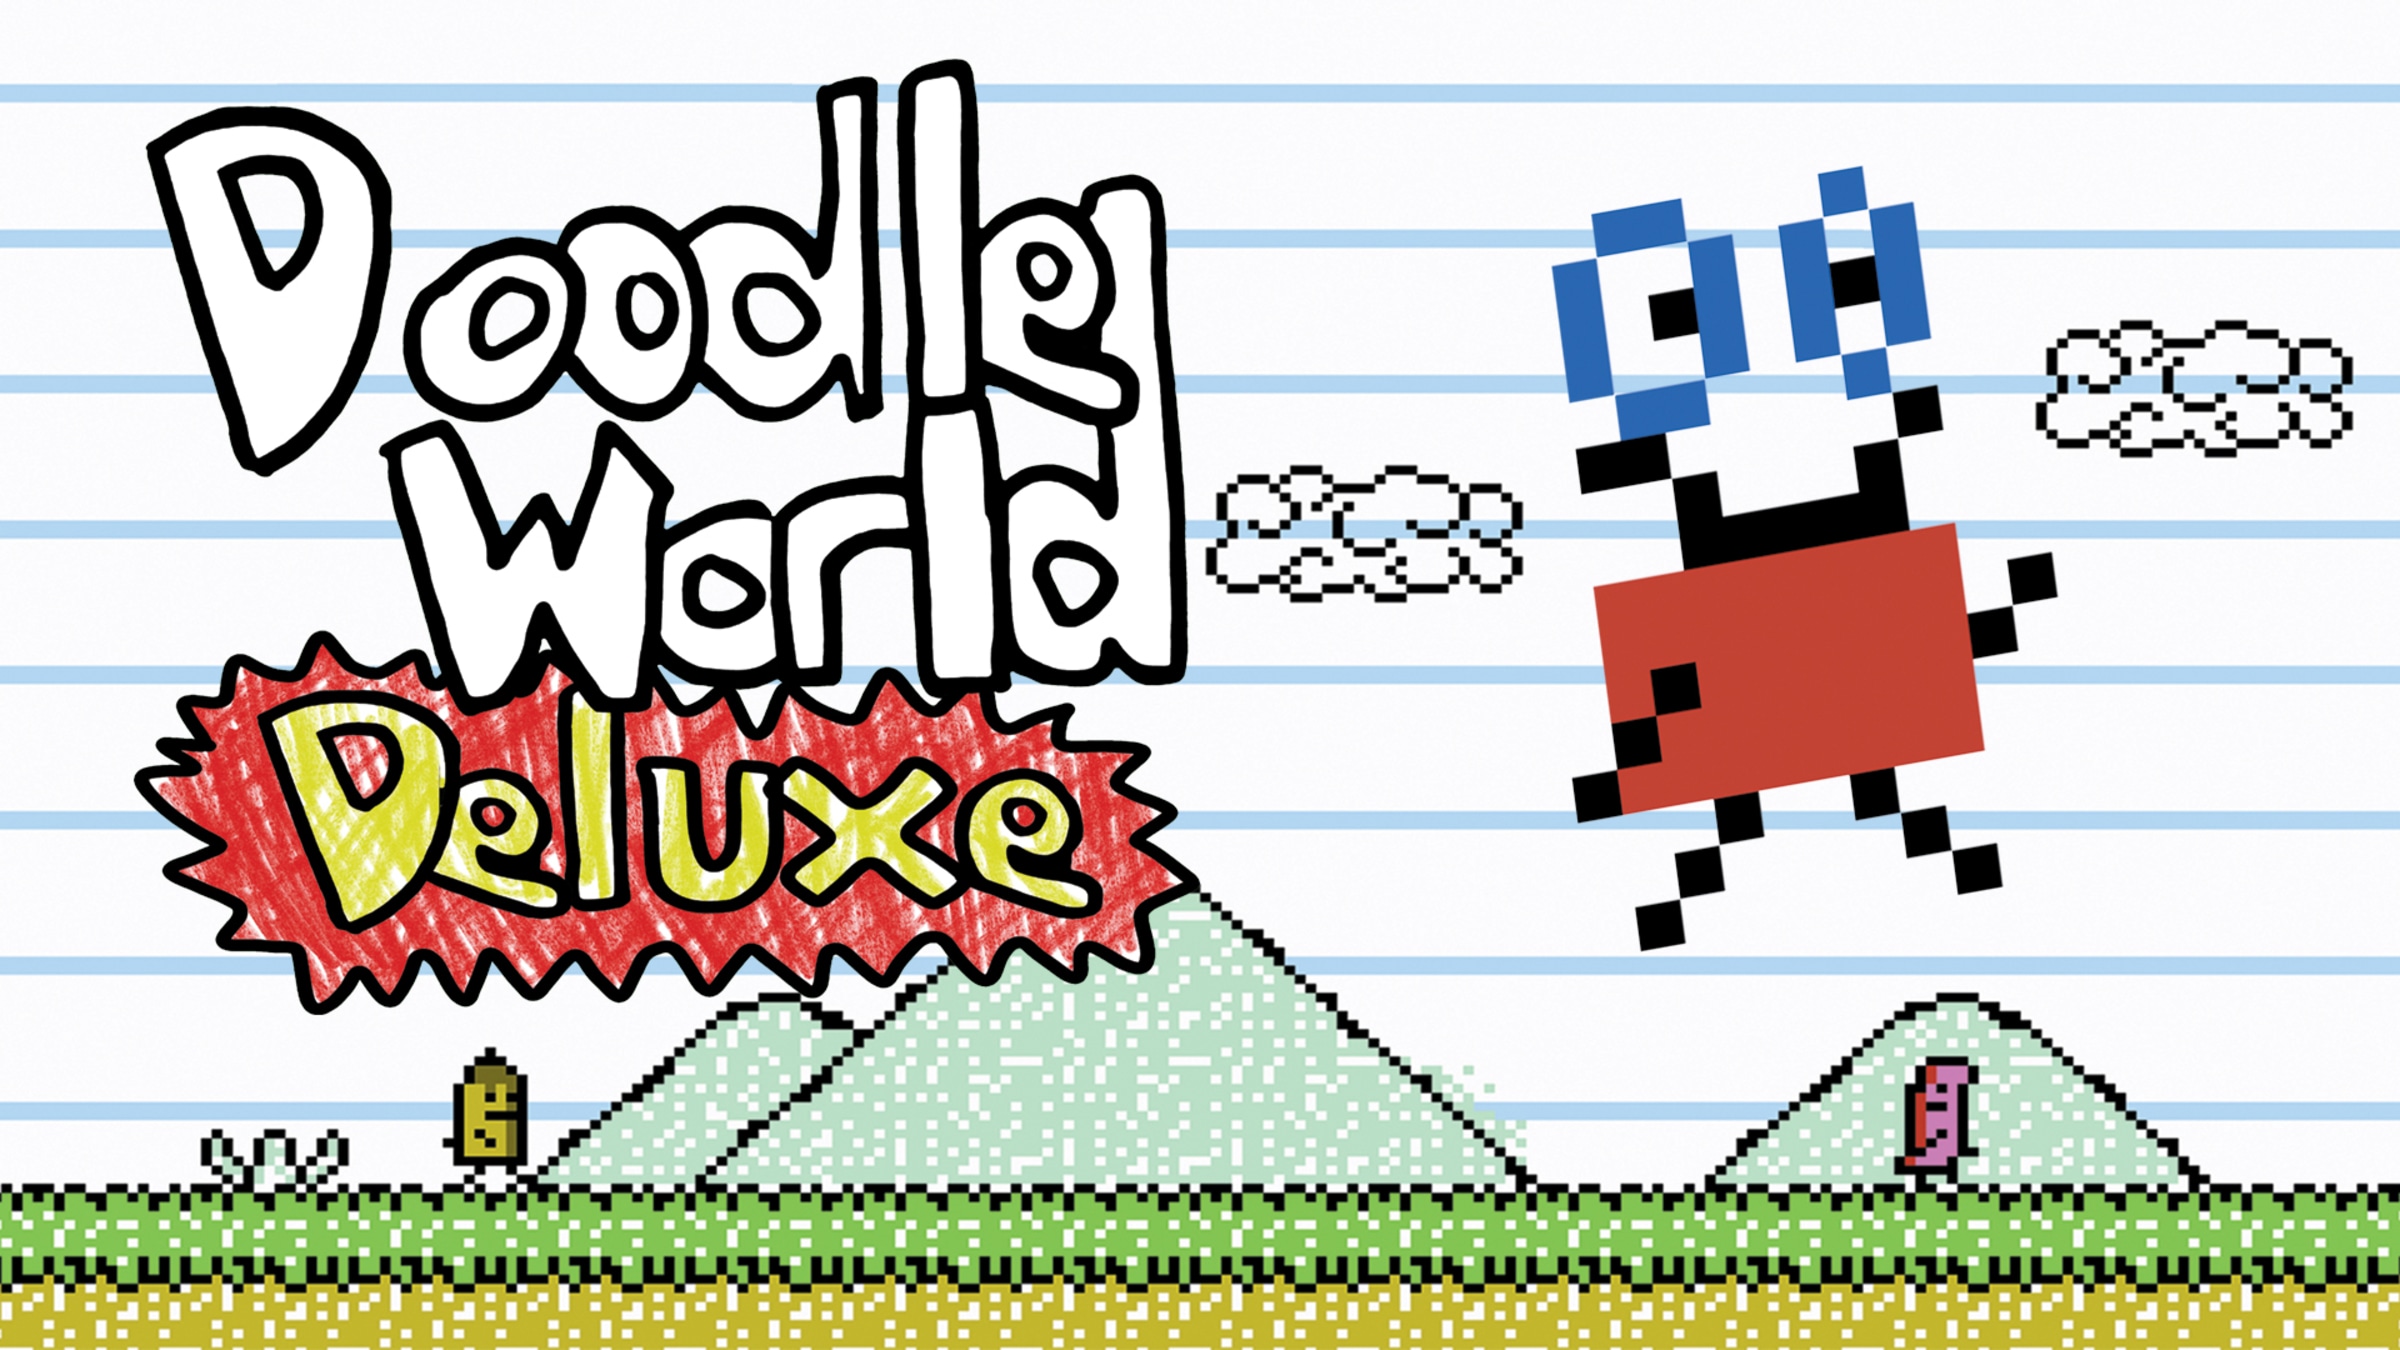 Doodle World Deluxe for Nintendo Switch - Nintendo Official Site